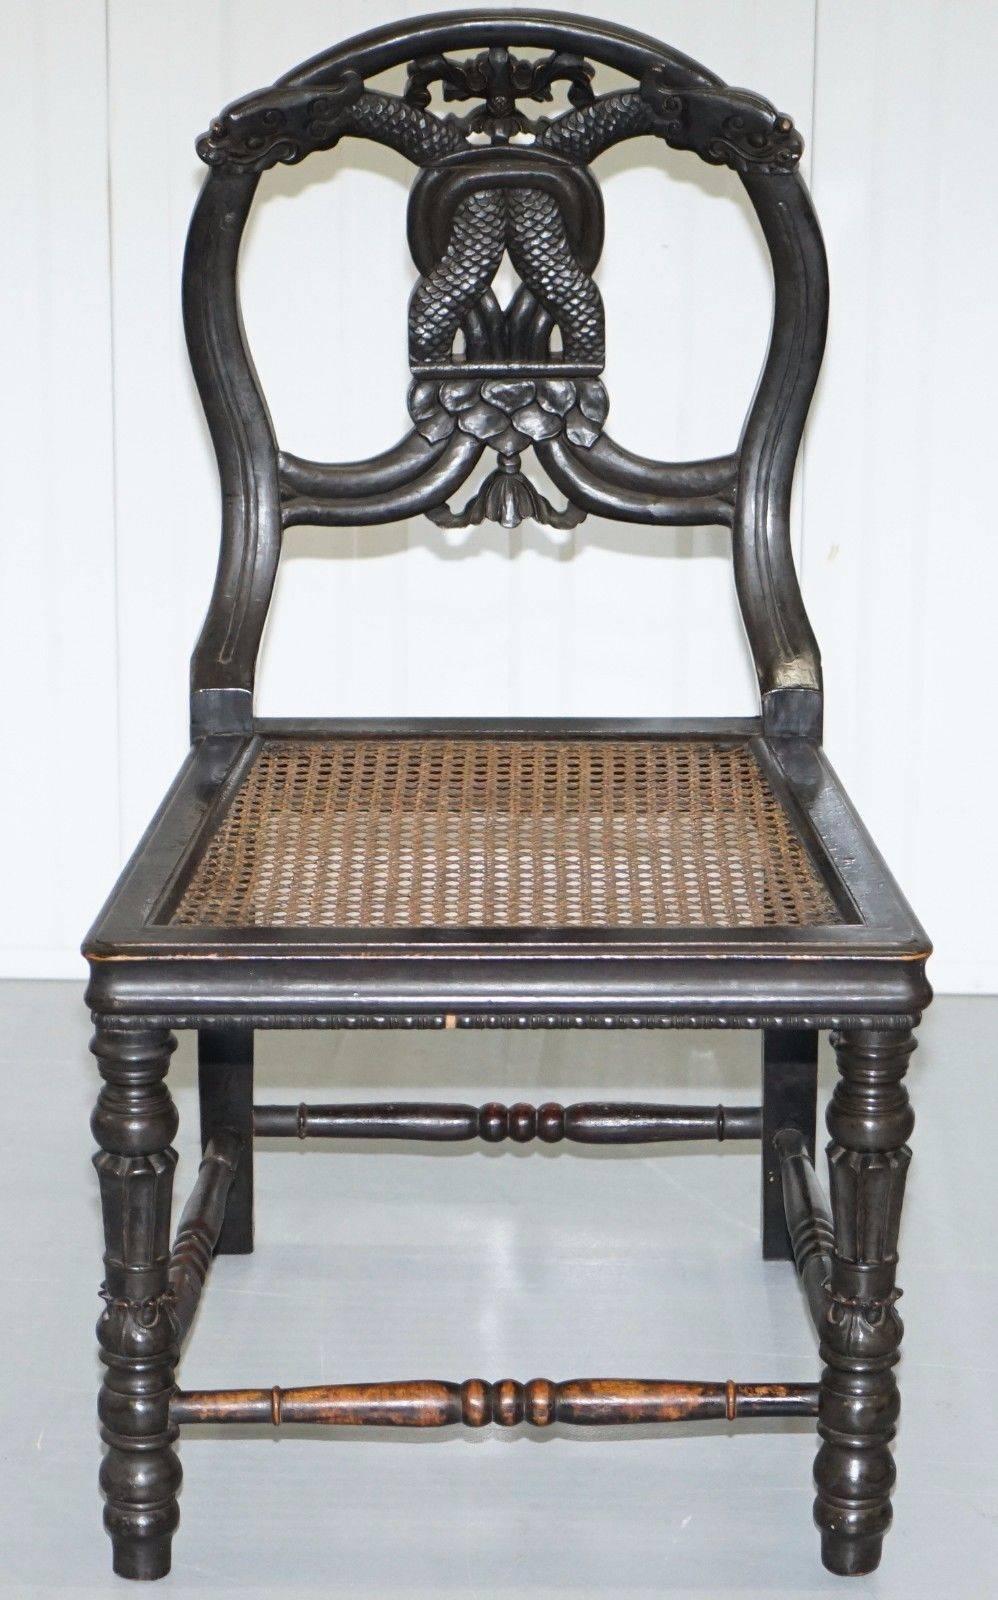 We are delighted to offer for sale this stunning set of four 19th century hand-carved dragon head ebonized black chairs with bergere bases

A very rare set in stunning unrestored period condition throughout, the bergere or rattan is all completely